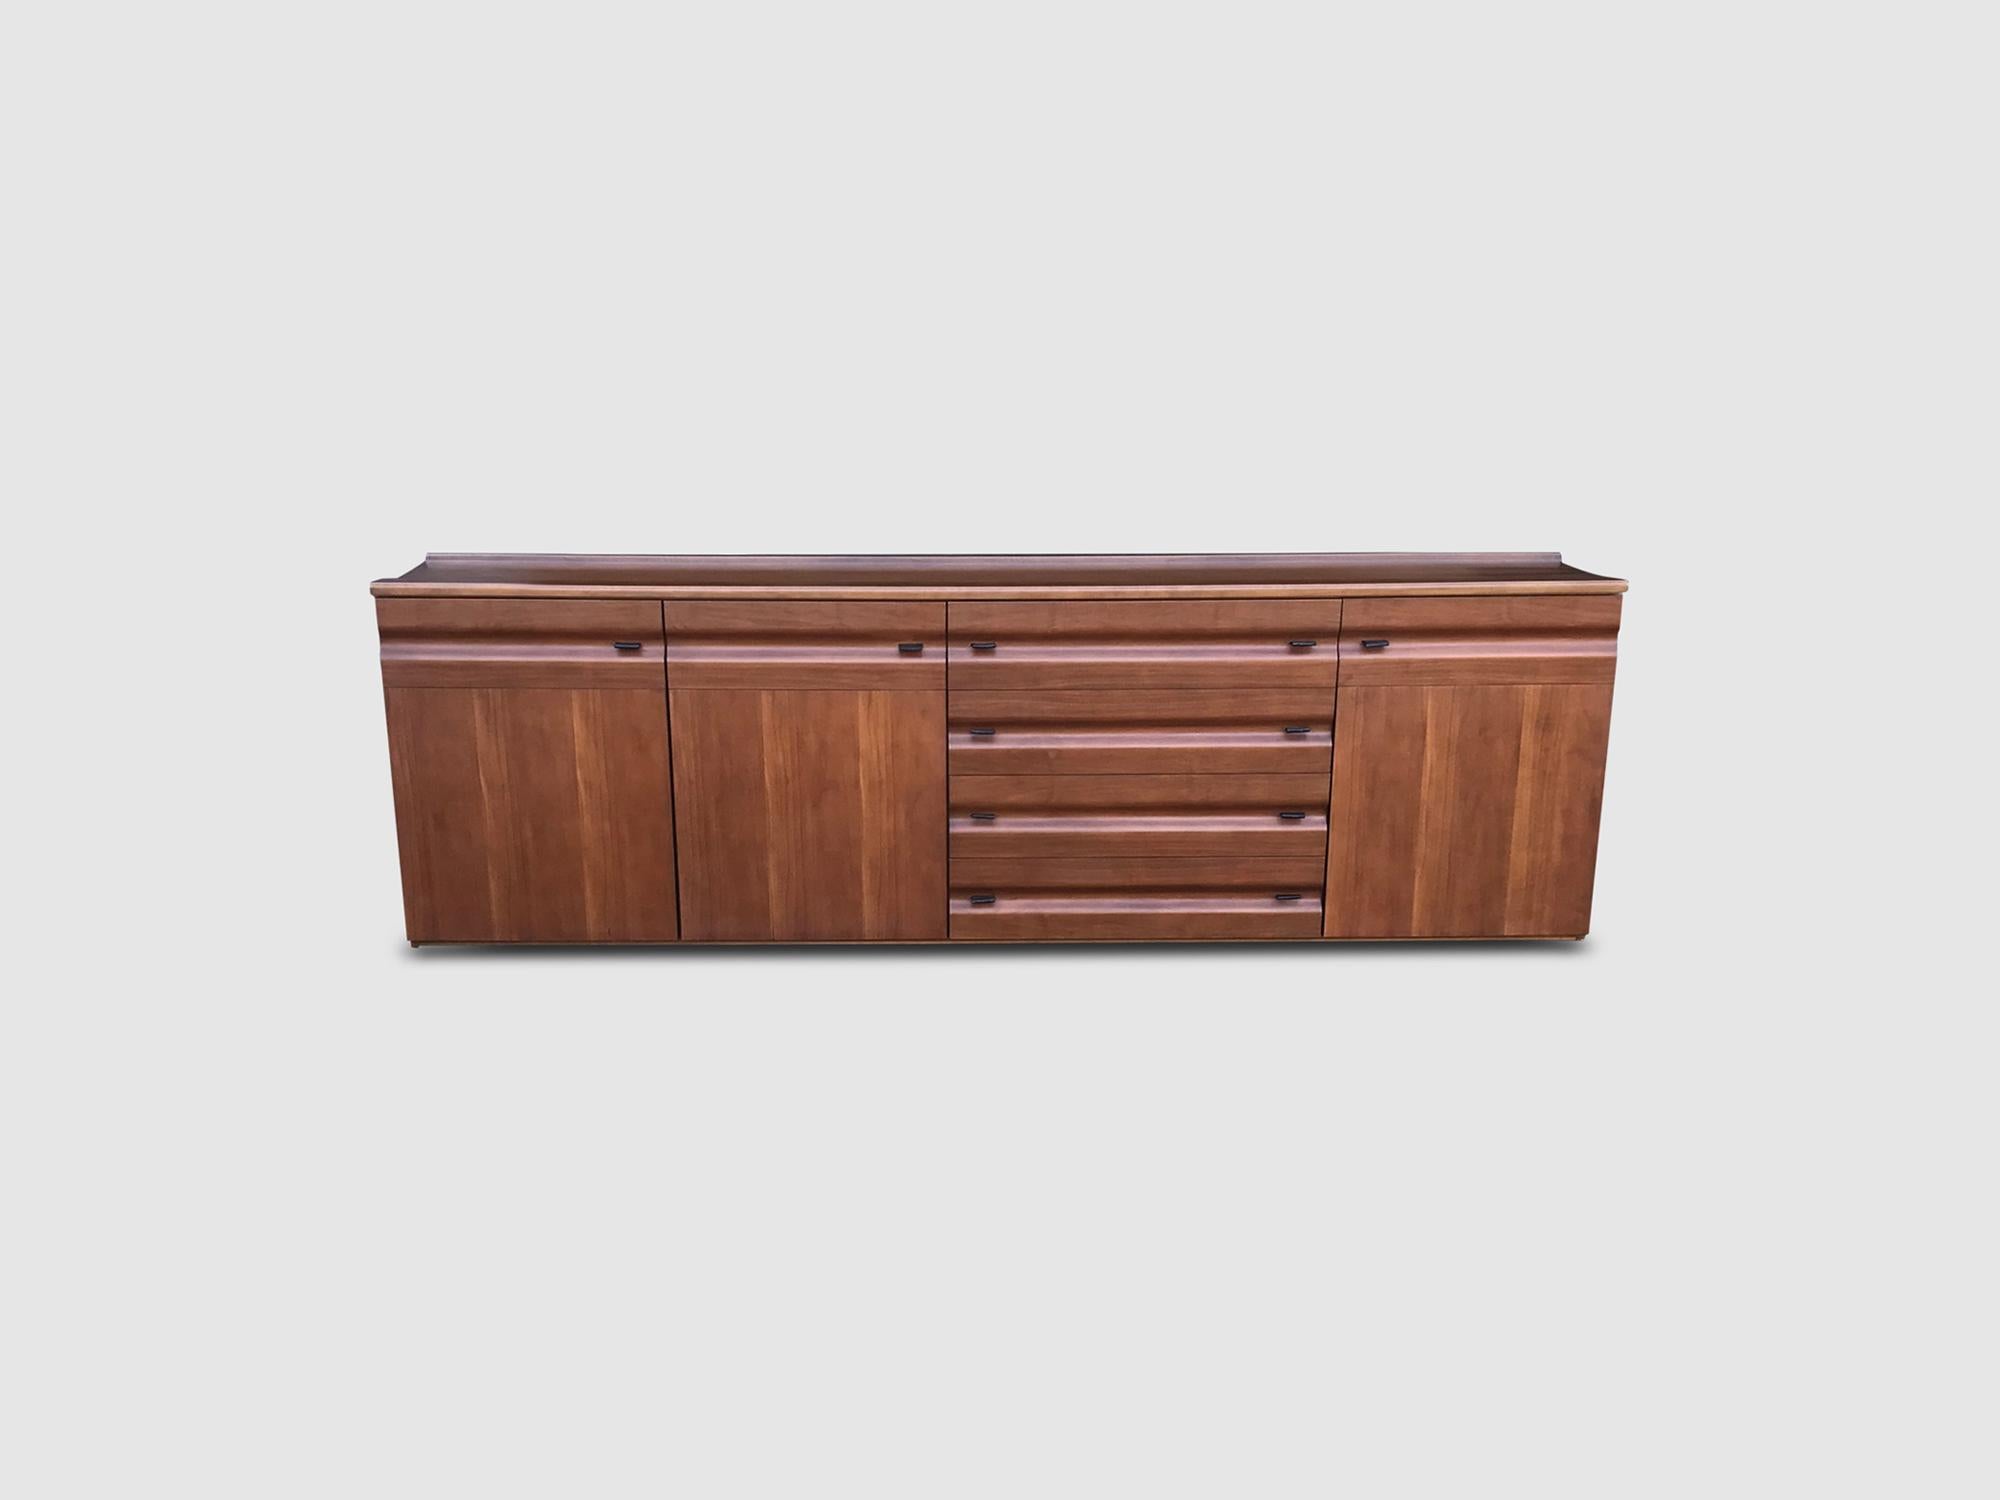 Impressive sculpted credenza of unknown designer by Gavina SpA.

This credenza was likely commissioned specifically for a client since the model isn’t traced back in official literature. It does bare the original Gavina sticker.

The credenza is